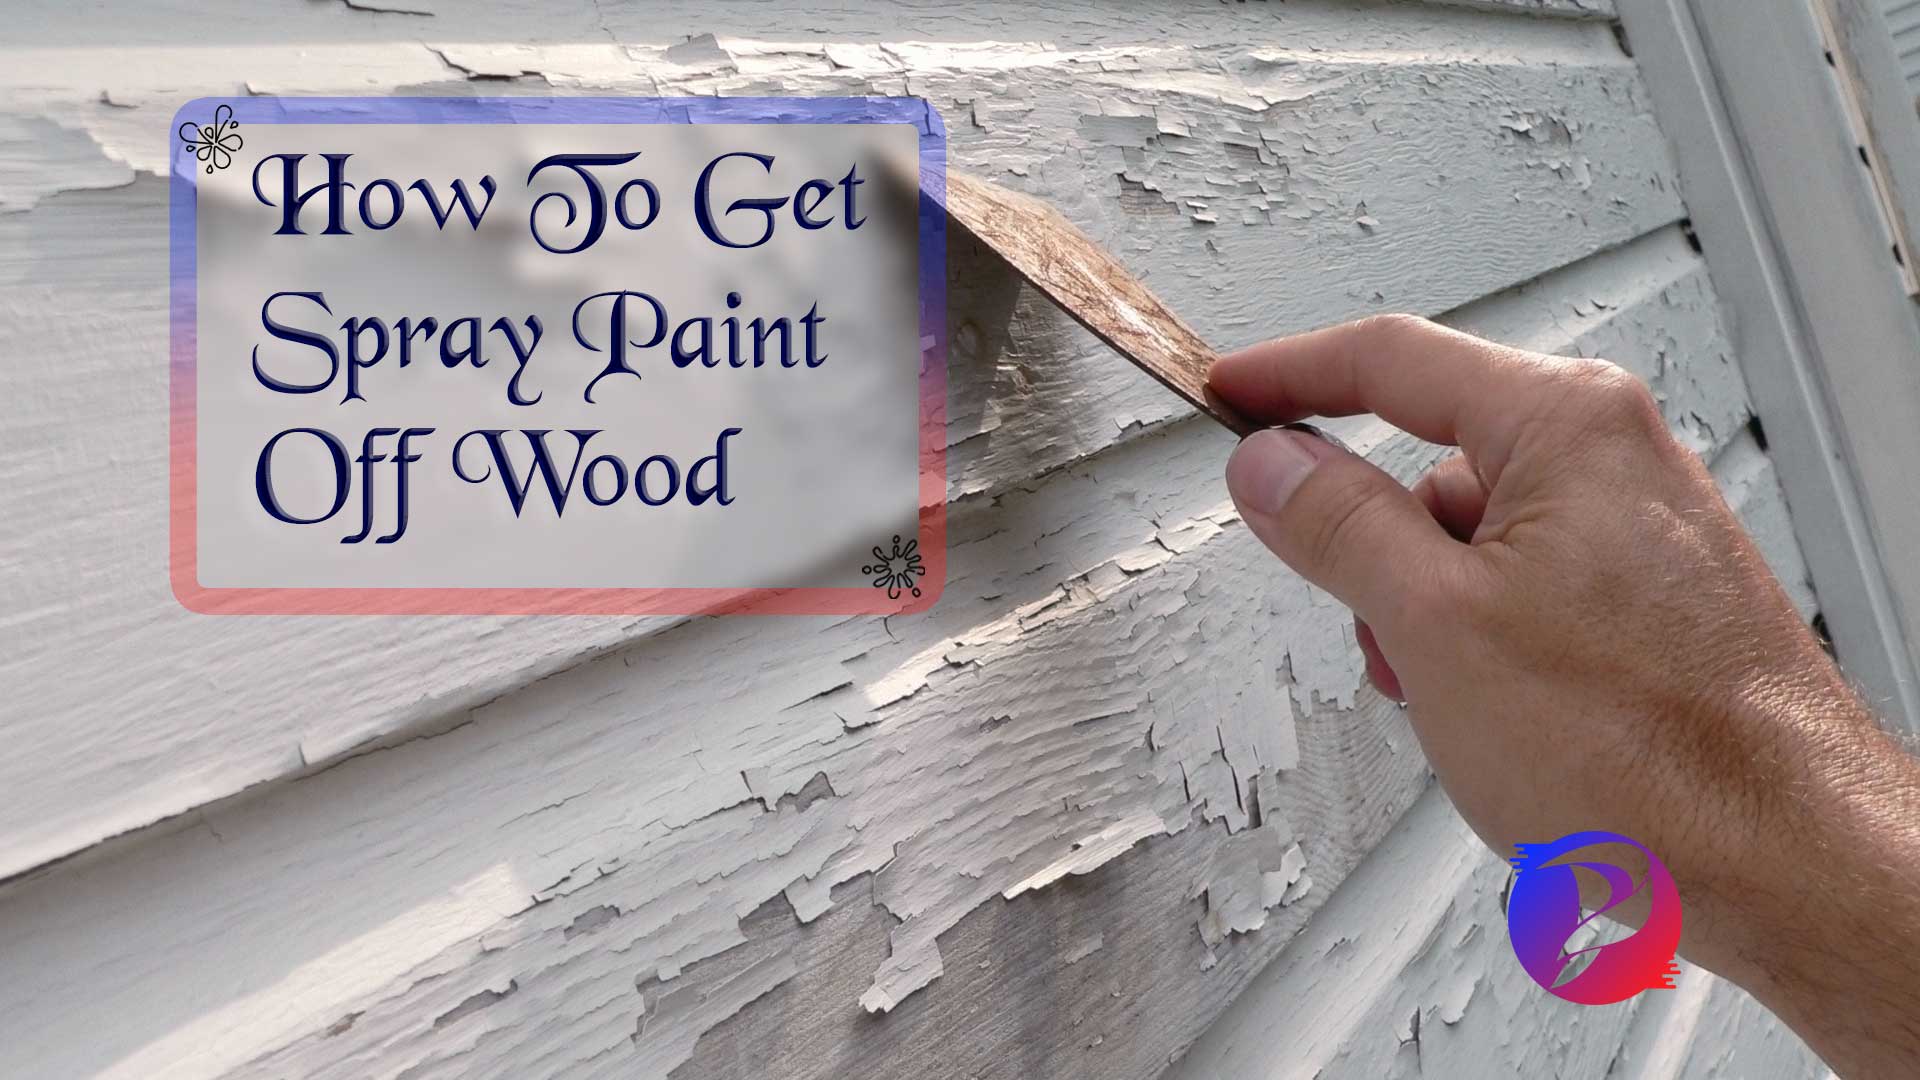 How To Get Spray Paint Off Wood 5, Remove Spray Paint From Hardwood Floors